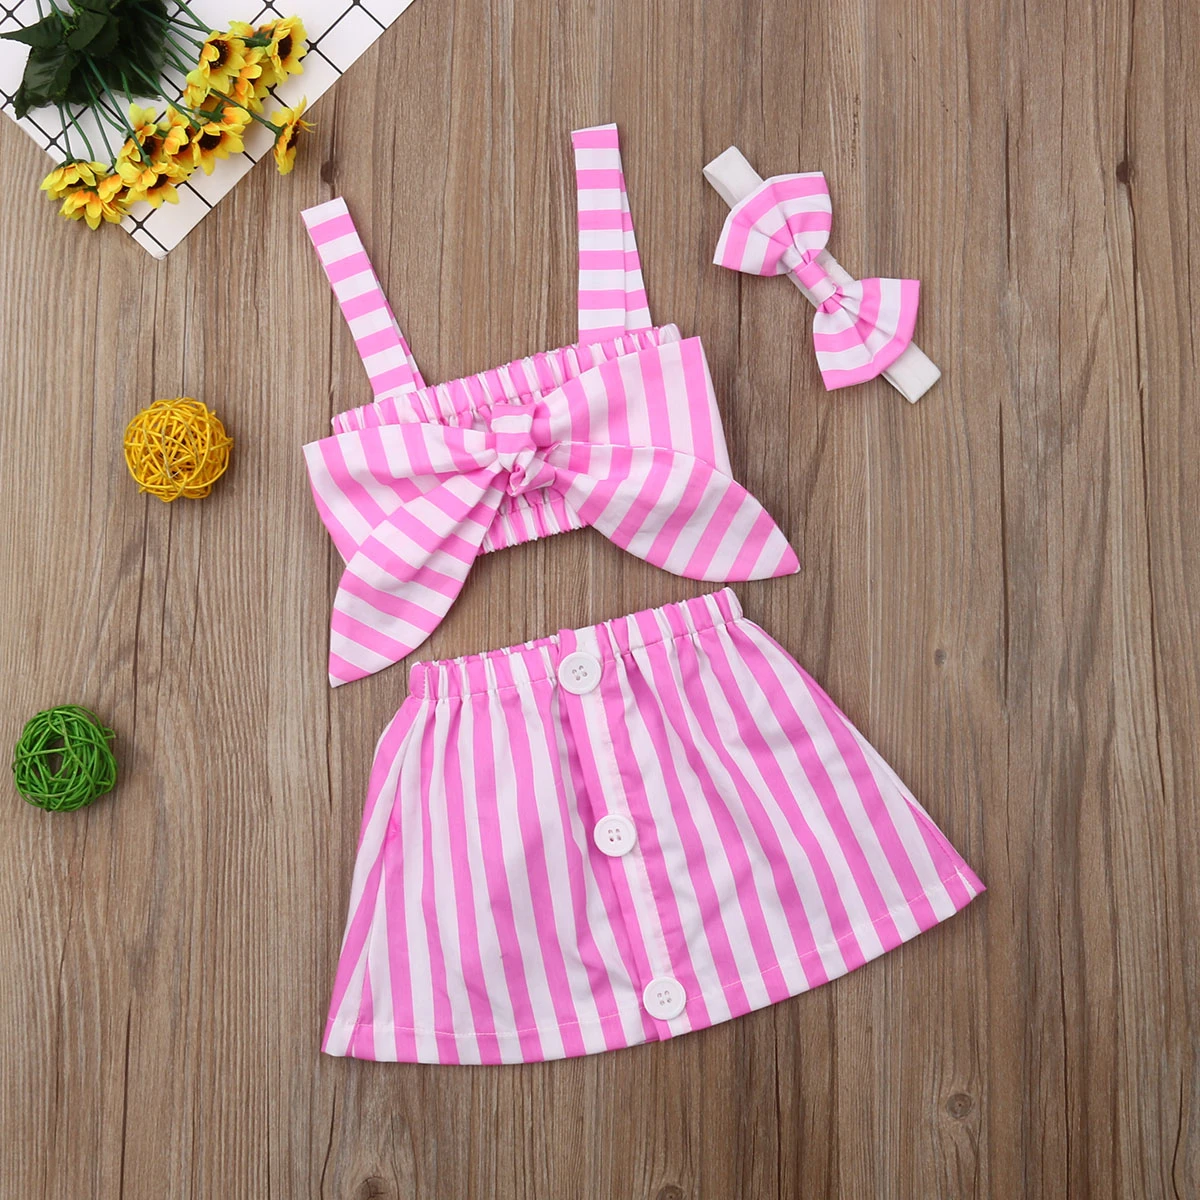 baby clothing set essentials Baby Girl Clothes Summer Stirped Crop Top Vest+Short Skirt+headband 3pcs Outfits Clothes best Baby Clothing Set